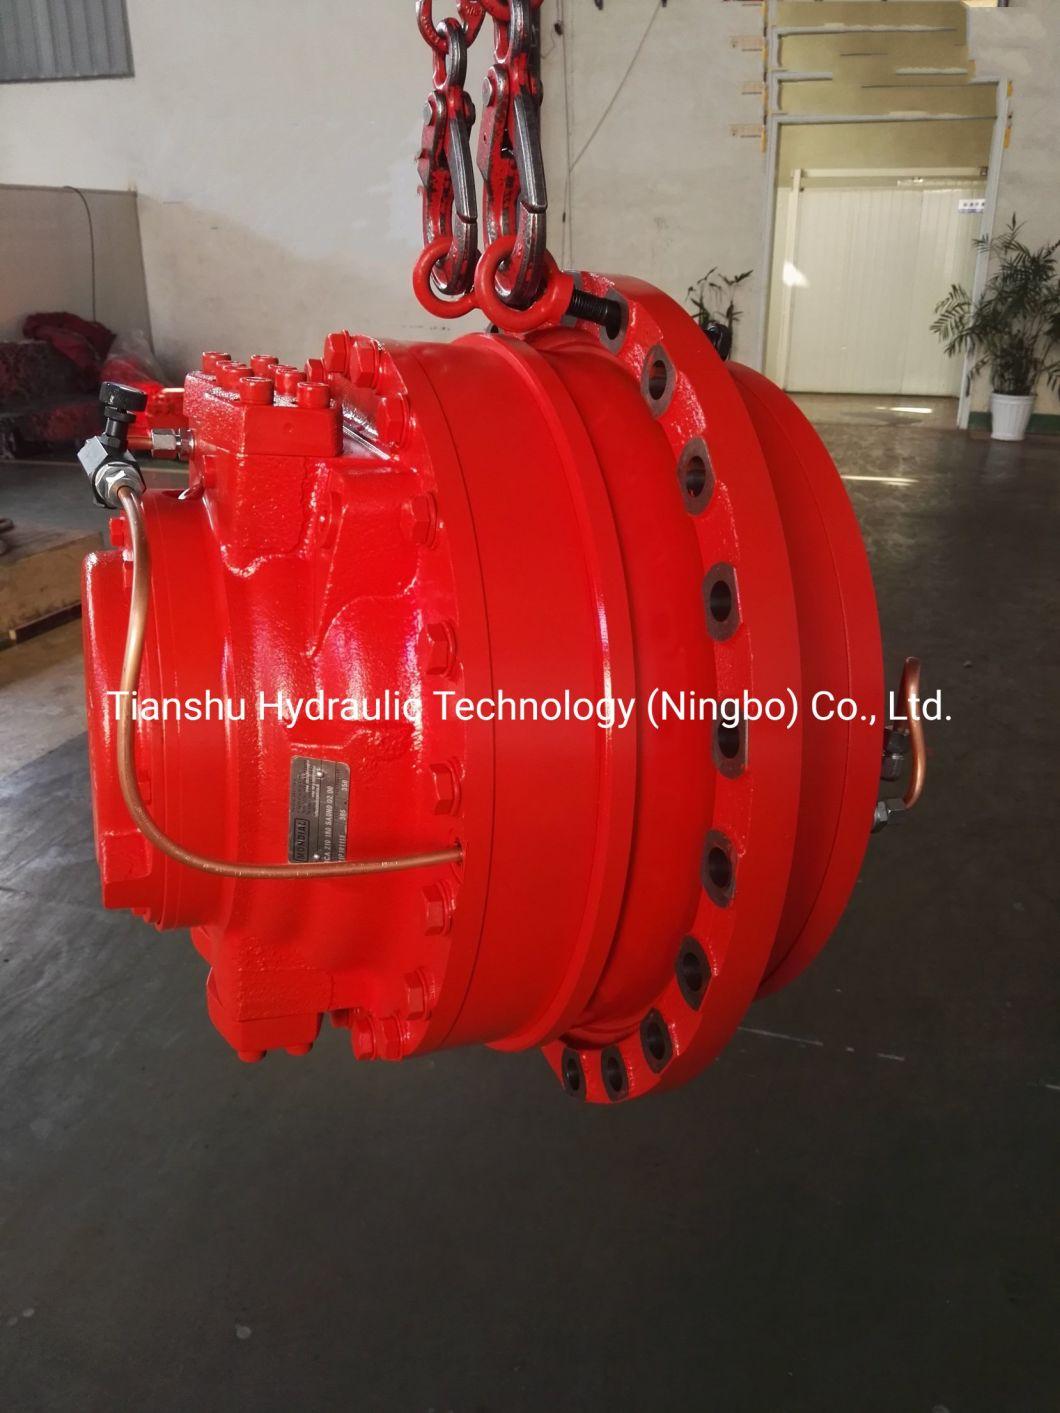 Rexroth Type Ca Series Hagglunds Radial Piston Hydraulic Motor Pump for Marine Winch and Anchor.